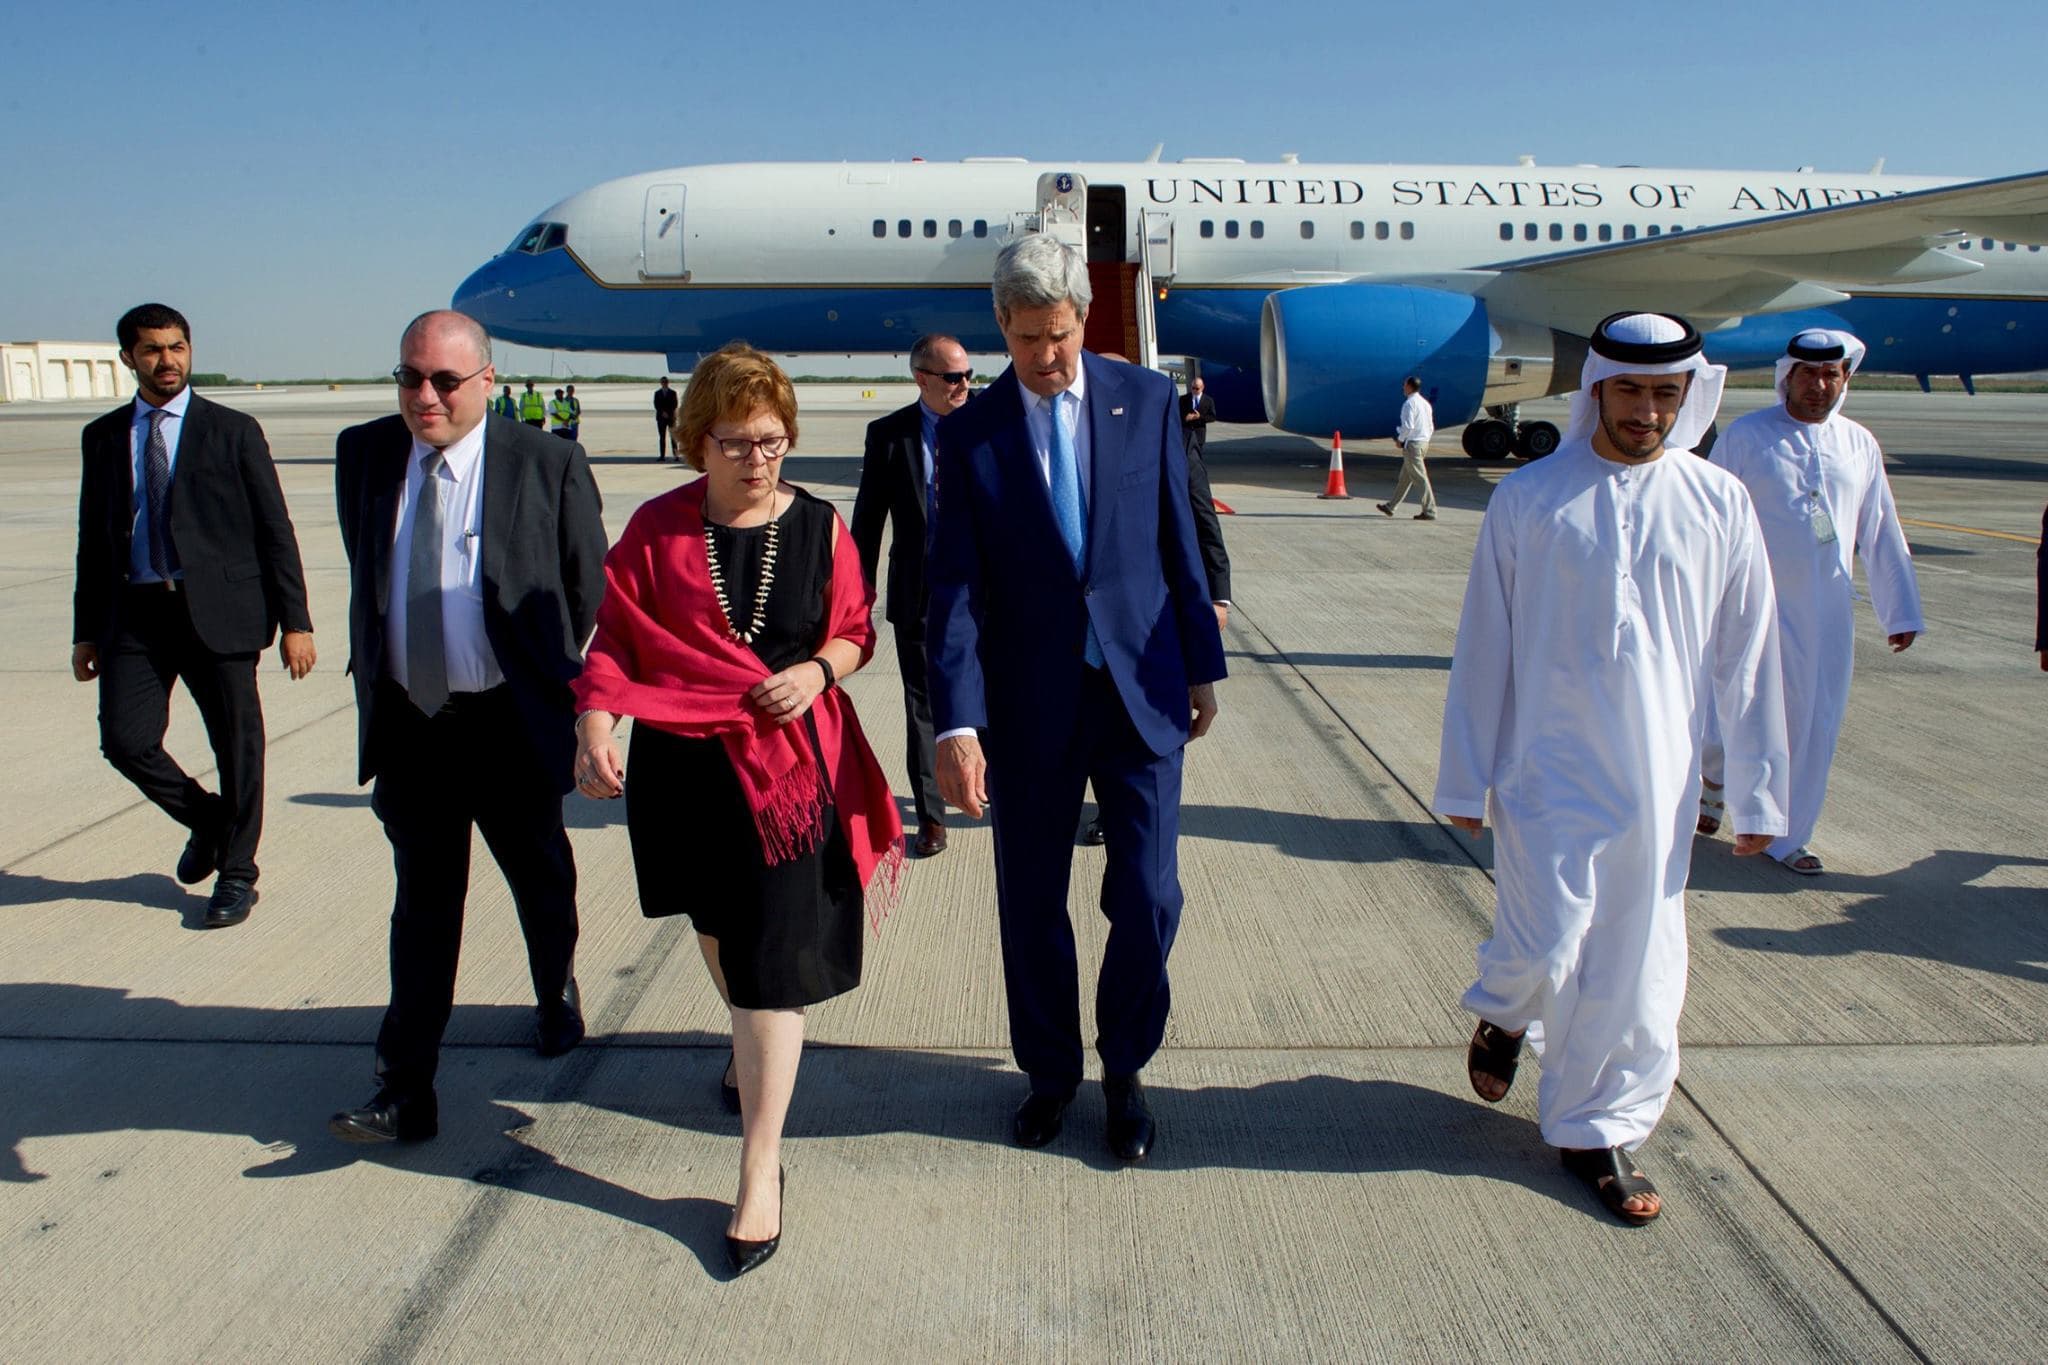 U.S. Secretary of State John Kerry is 'wheels down' in Abu Dhabi, United Arab Emirates. In Abu Dhabi, Secretary Kerry will meet with senior government officials to discuss a range of bilateral and regional political and security issues, with a focus on Syria. Follow the Secretary's trip here: http://go.usa.gov/cbMRF | Photos: https://flic.kr/s/aHsknXV2hZ